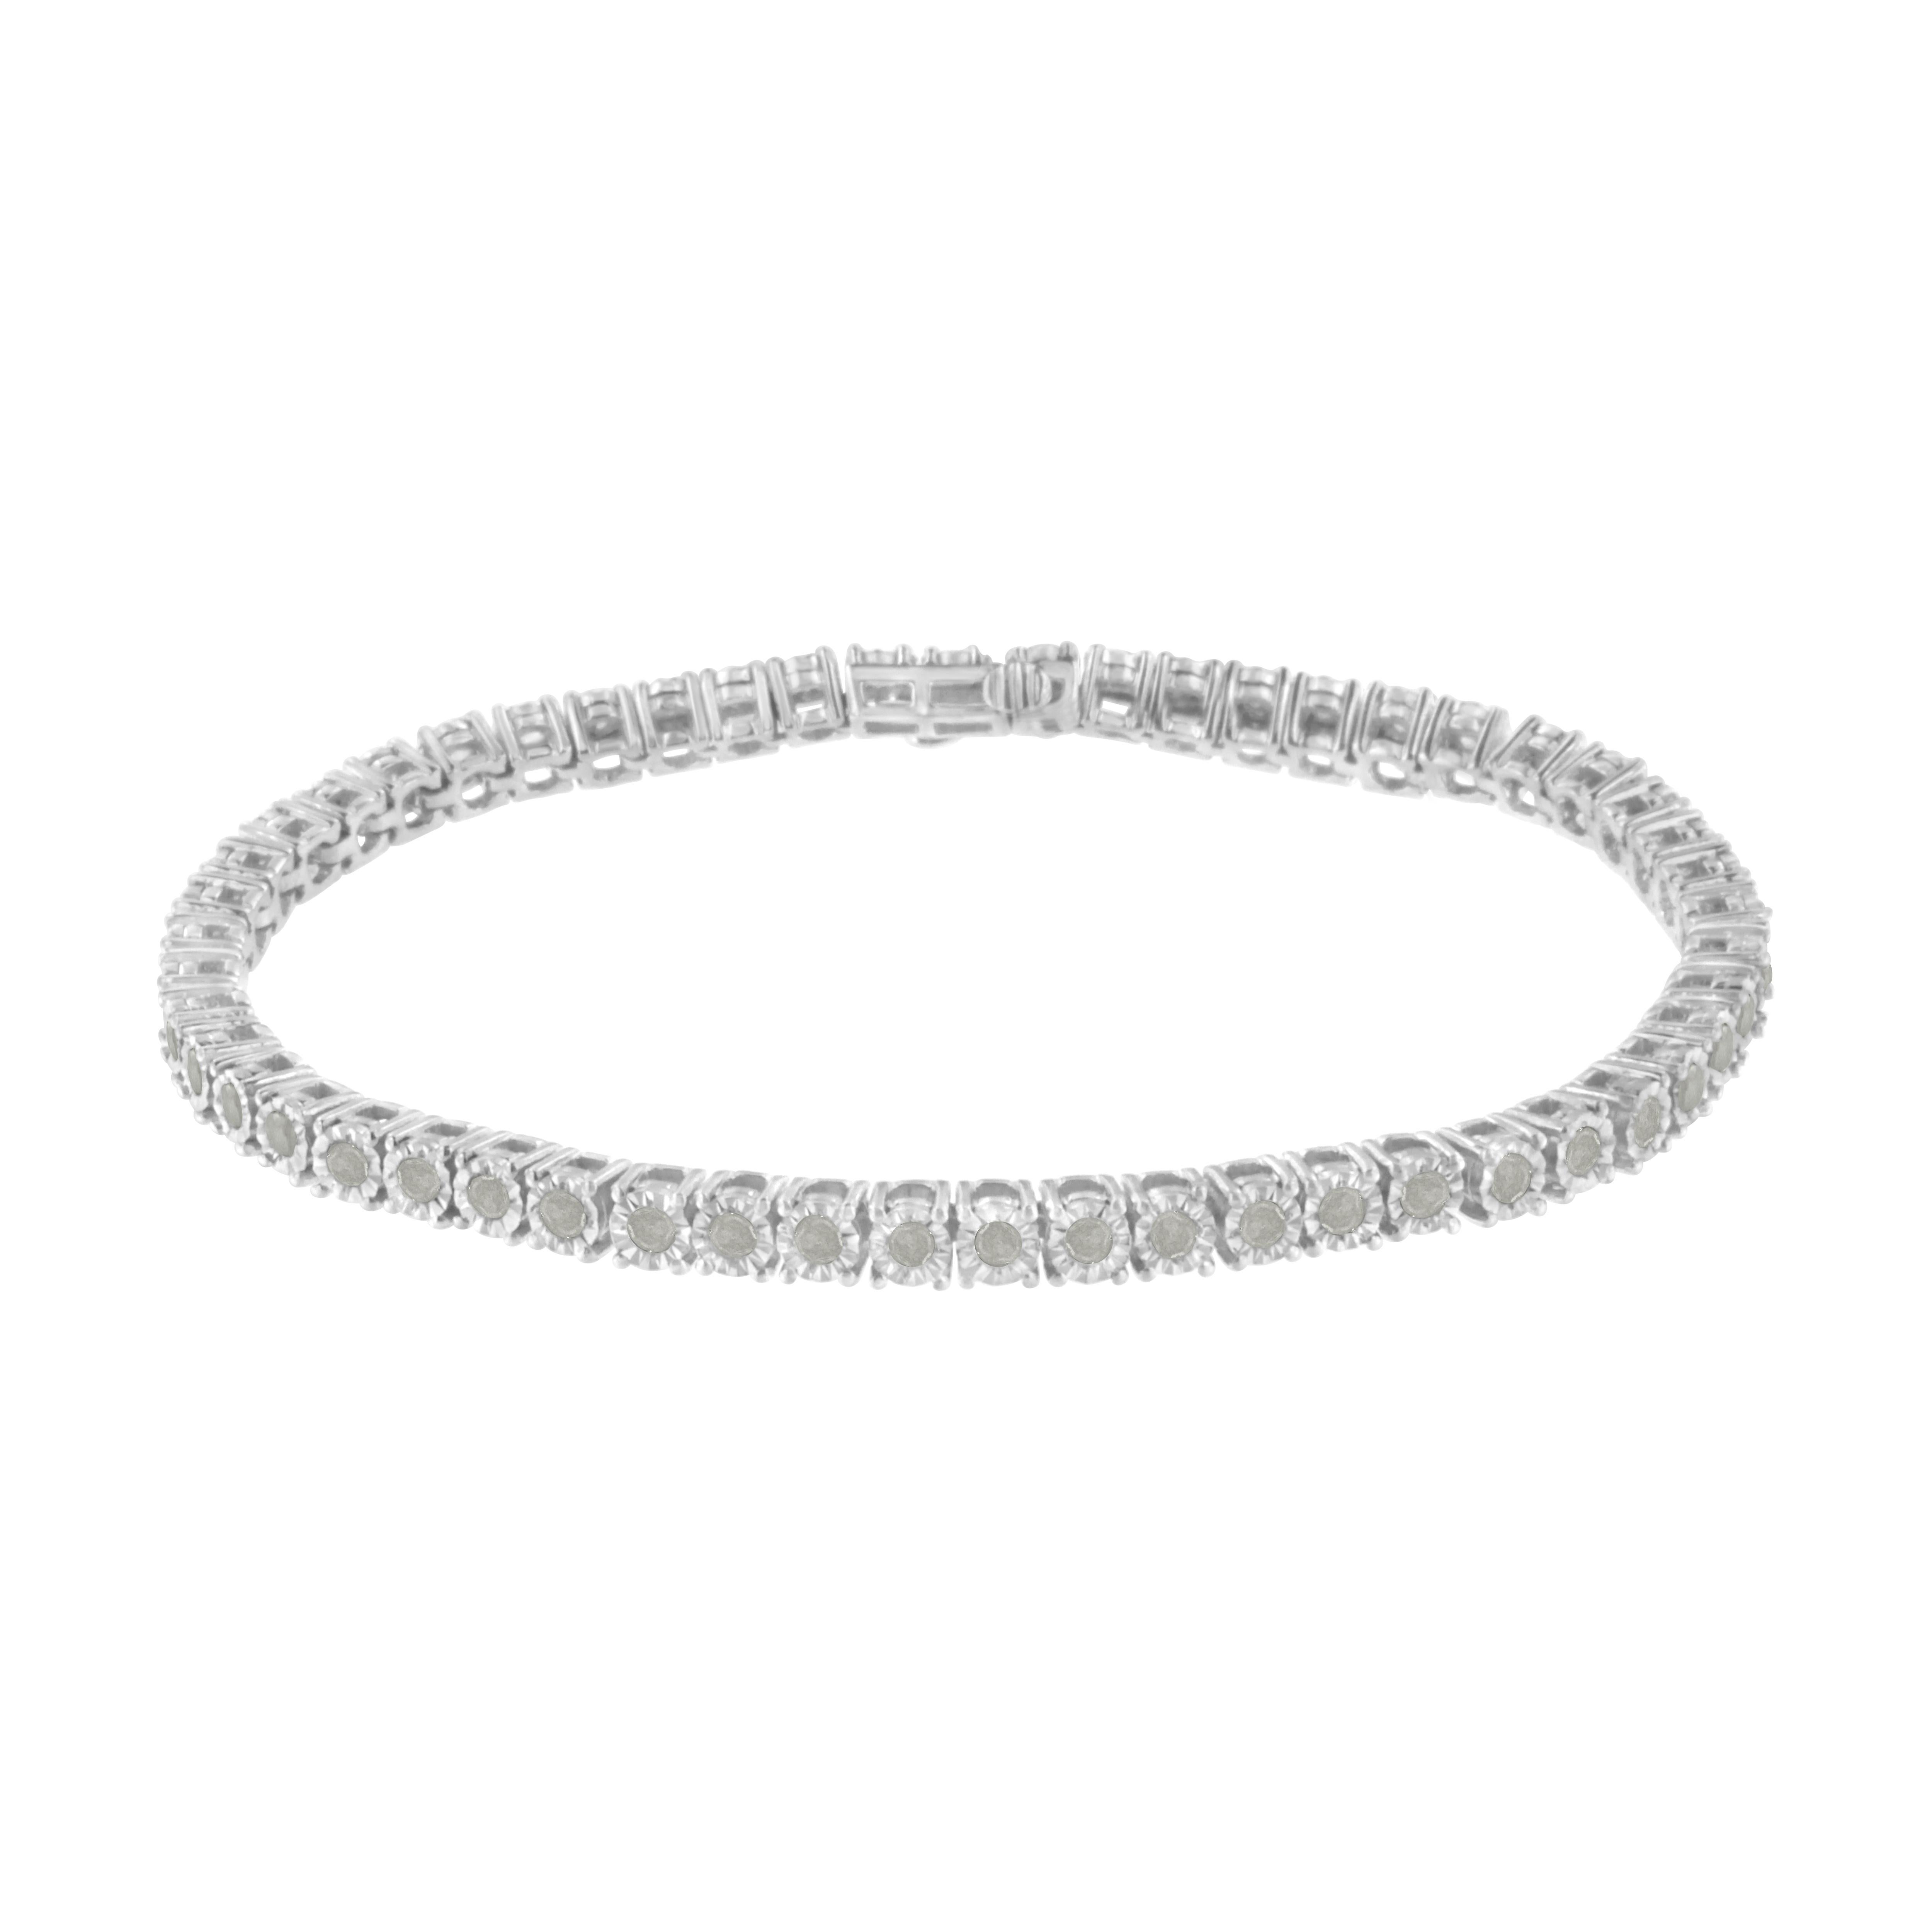 Elegant and timeless, this gorgeous pure 92.5% sterling silver tennis bracelet features 2 carat total weight of round diamonds. The bracelet features unique illusion-settings with miracle-plates that center each genuine diamond in a mirror-finish,